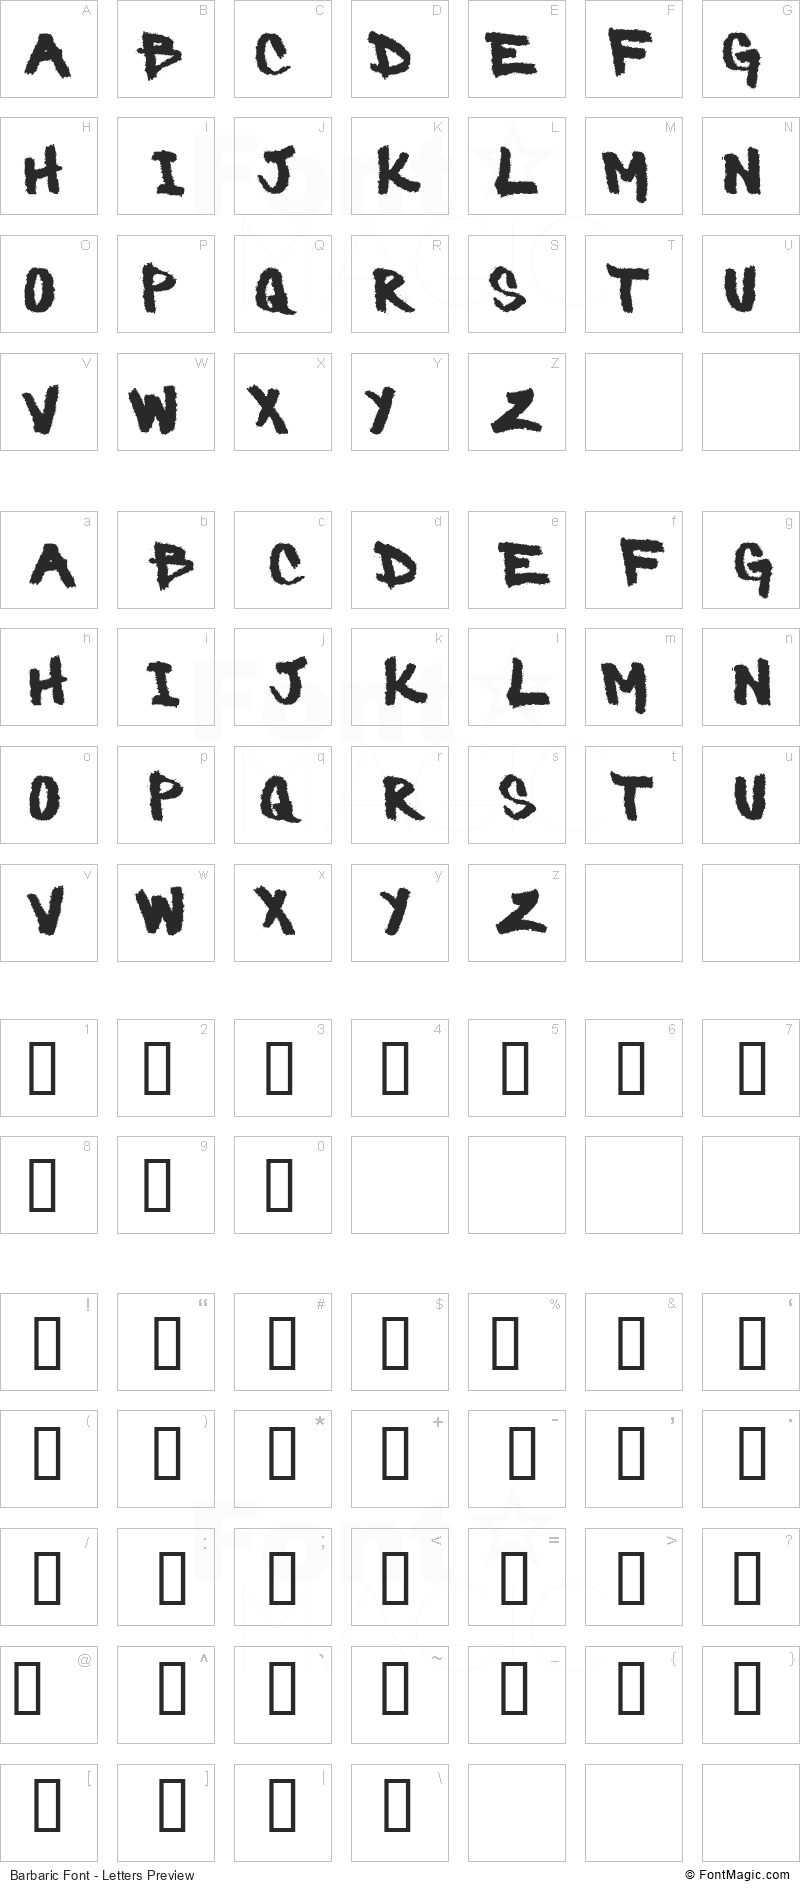 Barbaric Font - All Latters Preview Chart